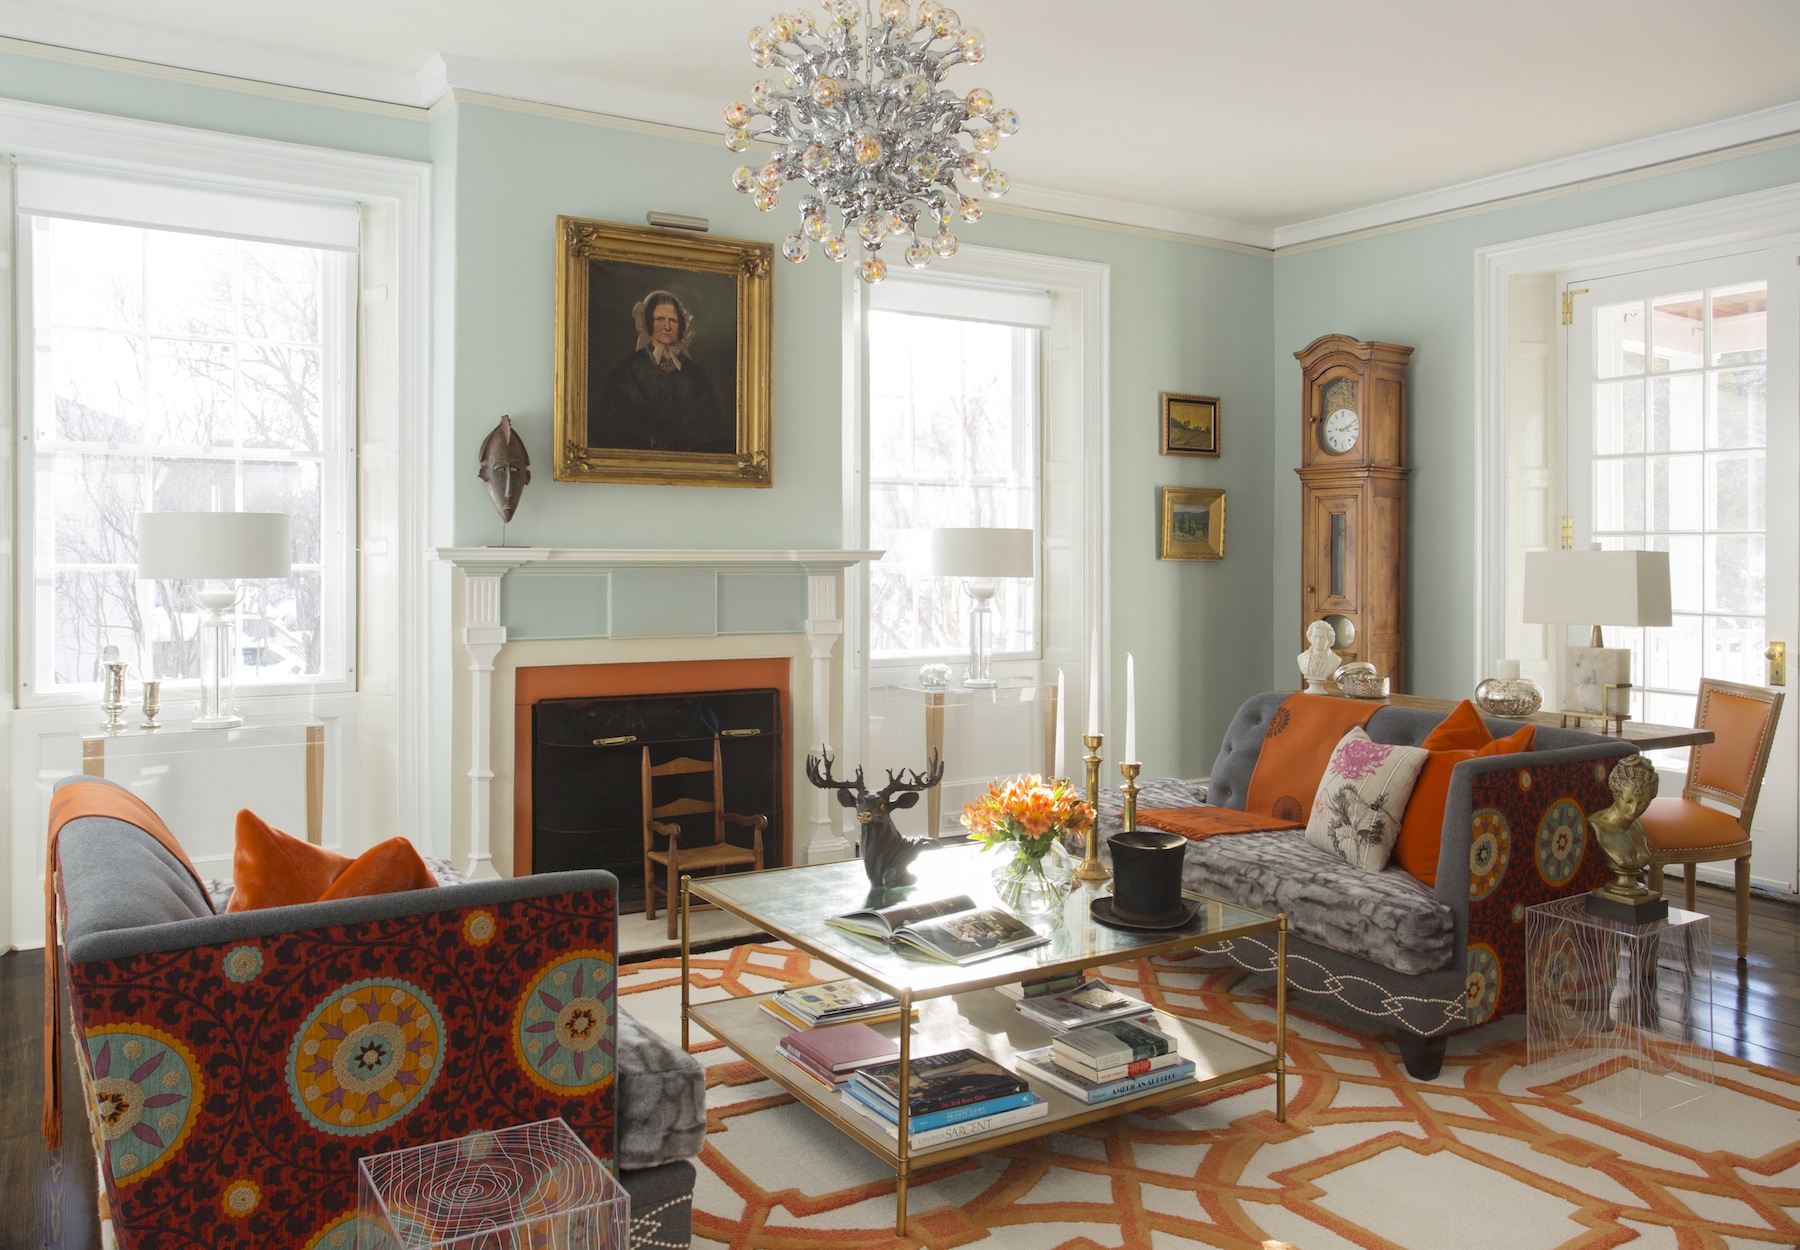 Interior Designer Steven Favreau's contemporary transformation of an 1832 Federal style home in Vermont.